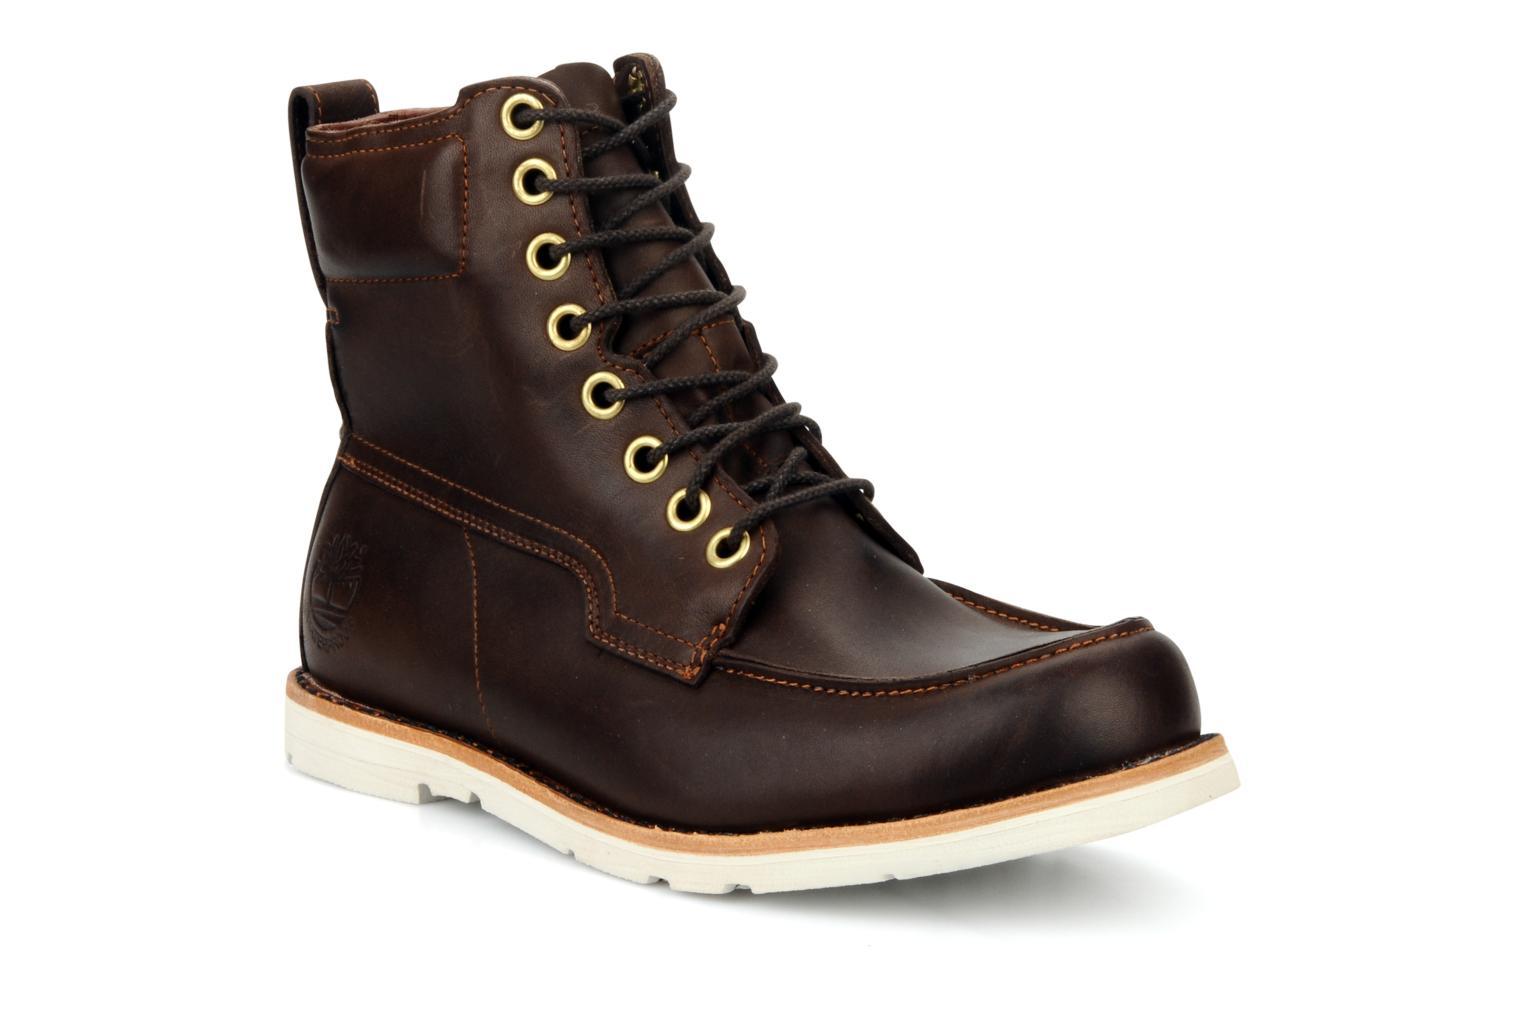 Foto Botines Timberland Earthkeepers original 2.0 rugged 6 moc toe boot Hombre foto 54583